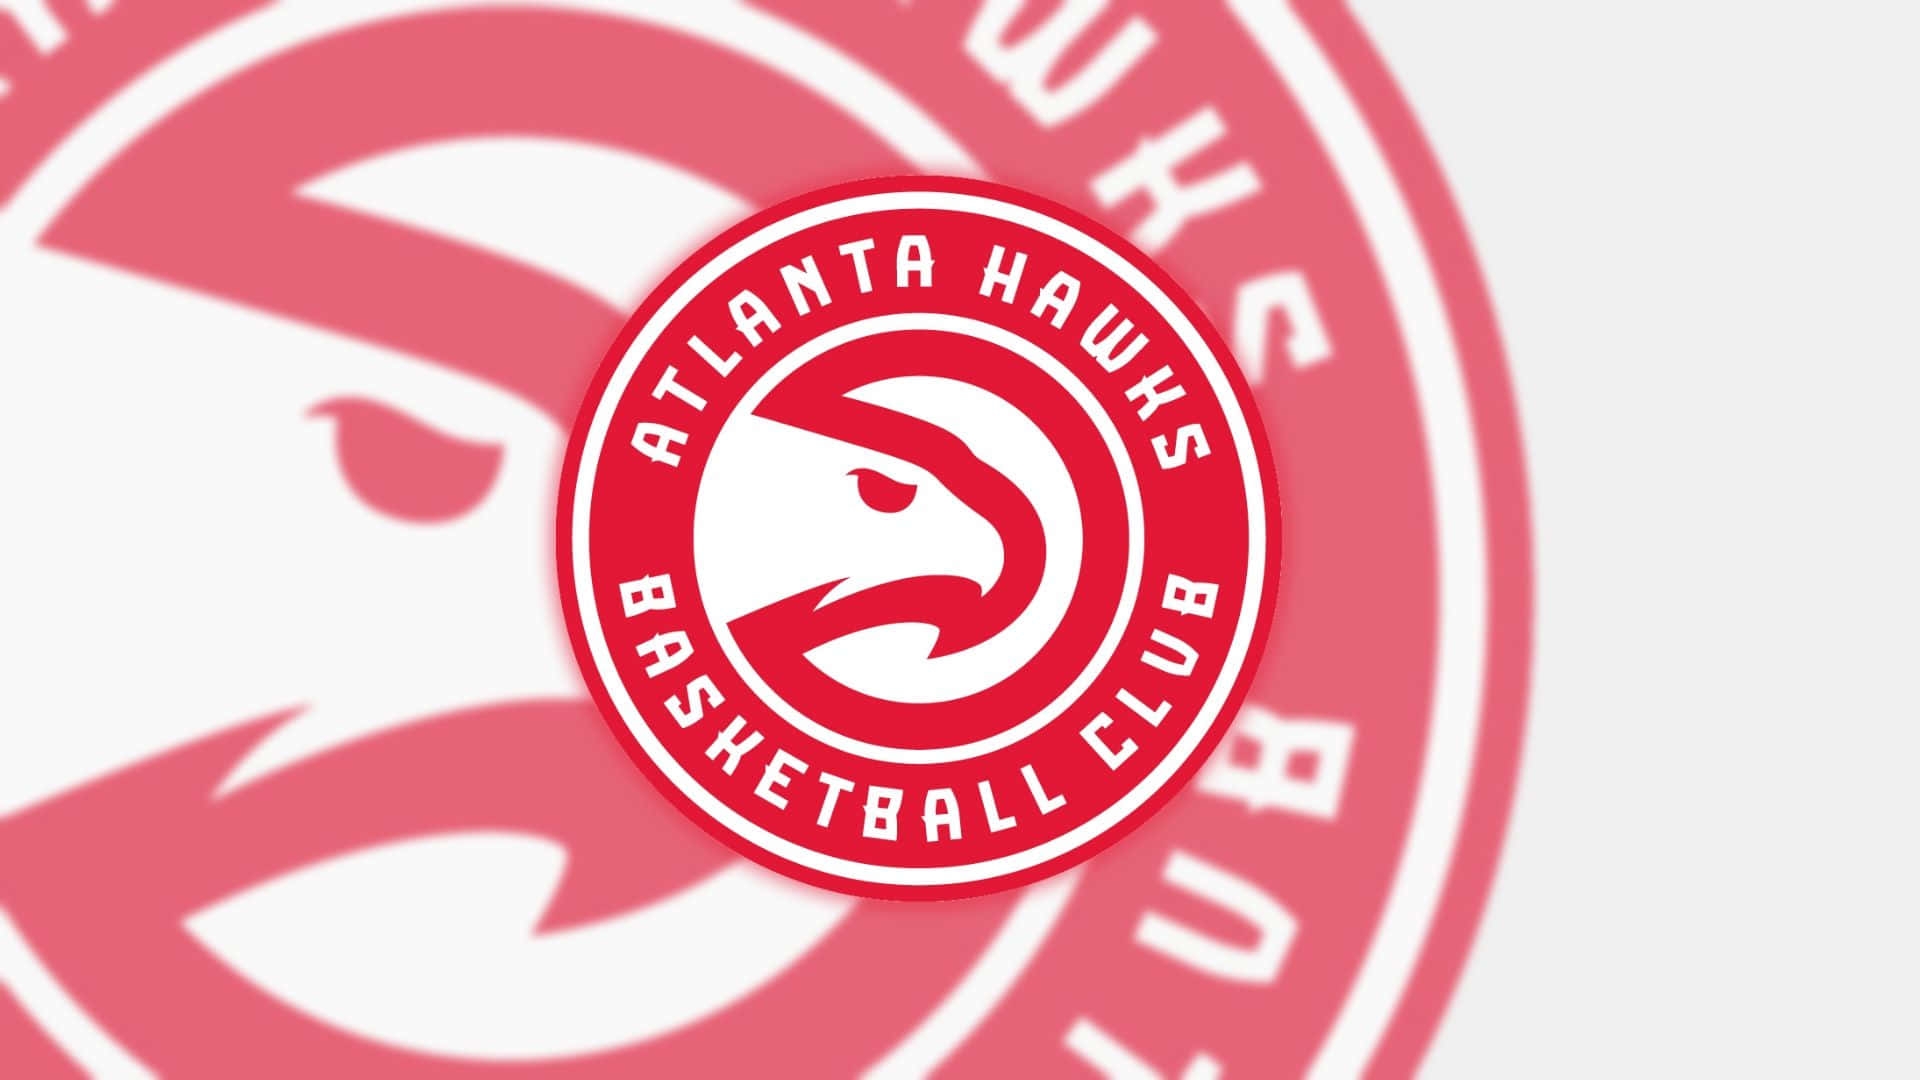 See the Atlanta Hawks soar to victory as they take the court in Philips Arena!